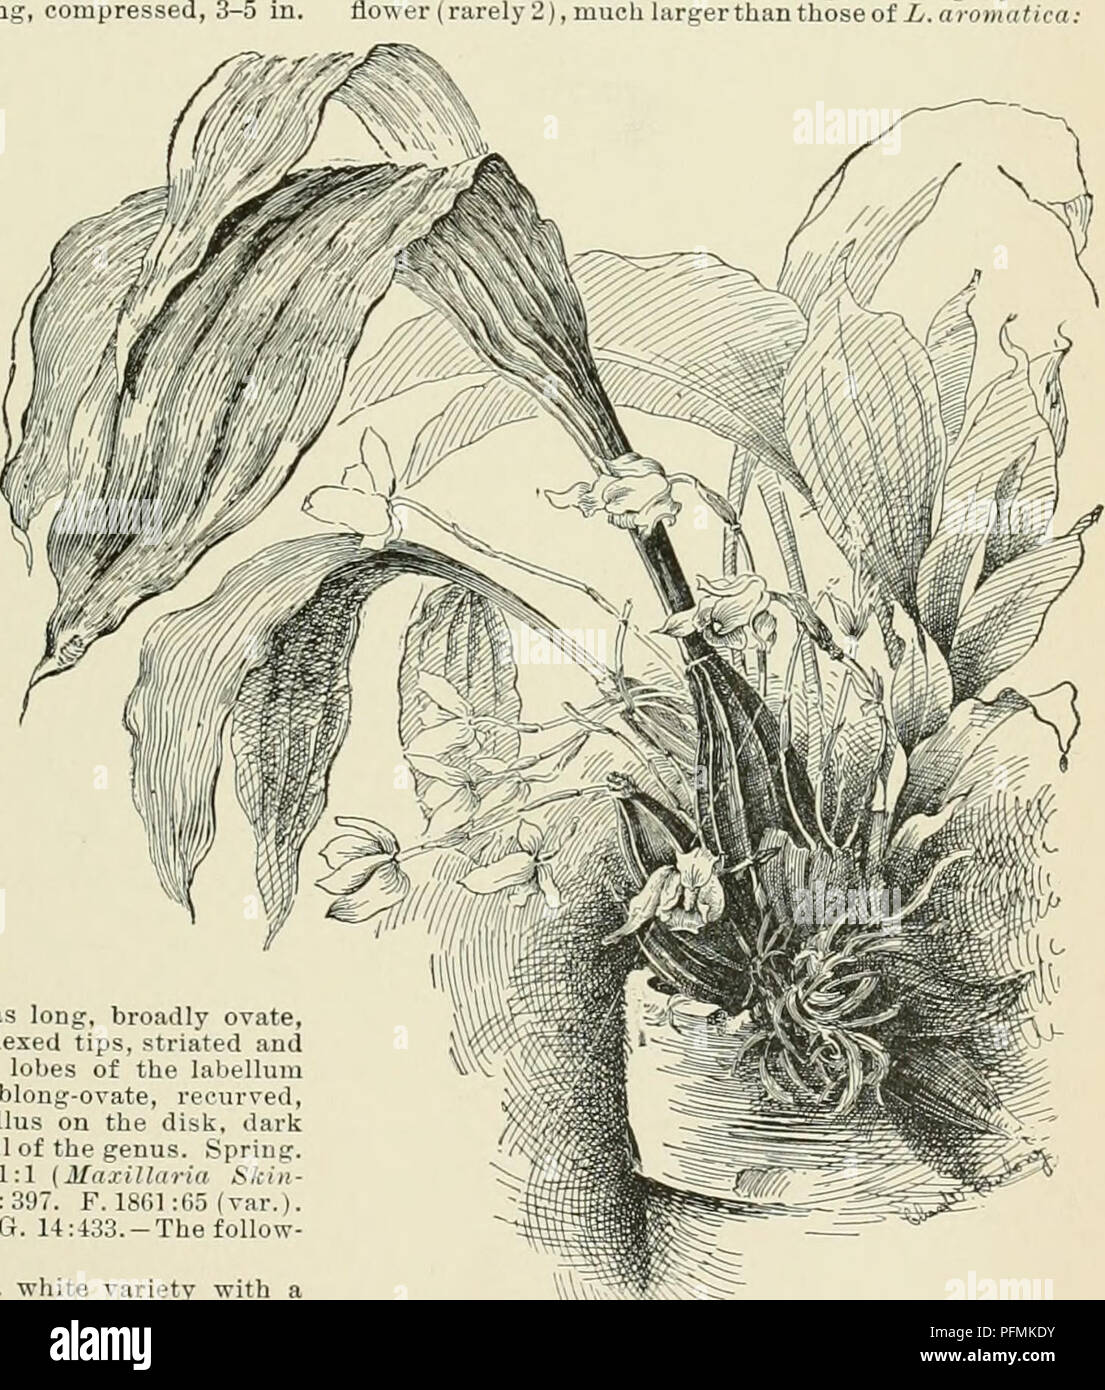 . Cyclopedia of American horticulture, comprising suggestions for cultivation of horticultural plants, descriptions of the species of fruits, vegetables, flowers, and ornamental plants sold in the United States and Canada, together with geographical and biographical sketches. Gardening. LYCASTE crenulate; callus tongue-shaped, coucave. Often the pai-ts of the tlowei- are more or less spotted and hairy in places. July, Aug. Colombia. Gt. 1321. 5. lanipes, Lindl. Pseudobulbs large: Ivs. lanceo- late, 12-18 in. long: fls. solitary, as many as 15 on a plant, creamy white; sepals and petals oblong- Stock Photo